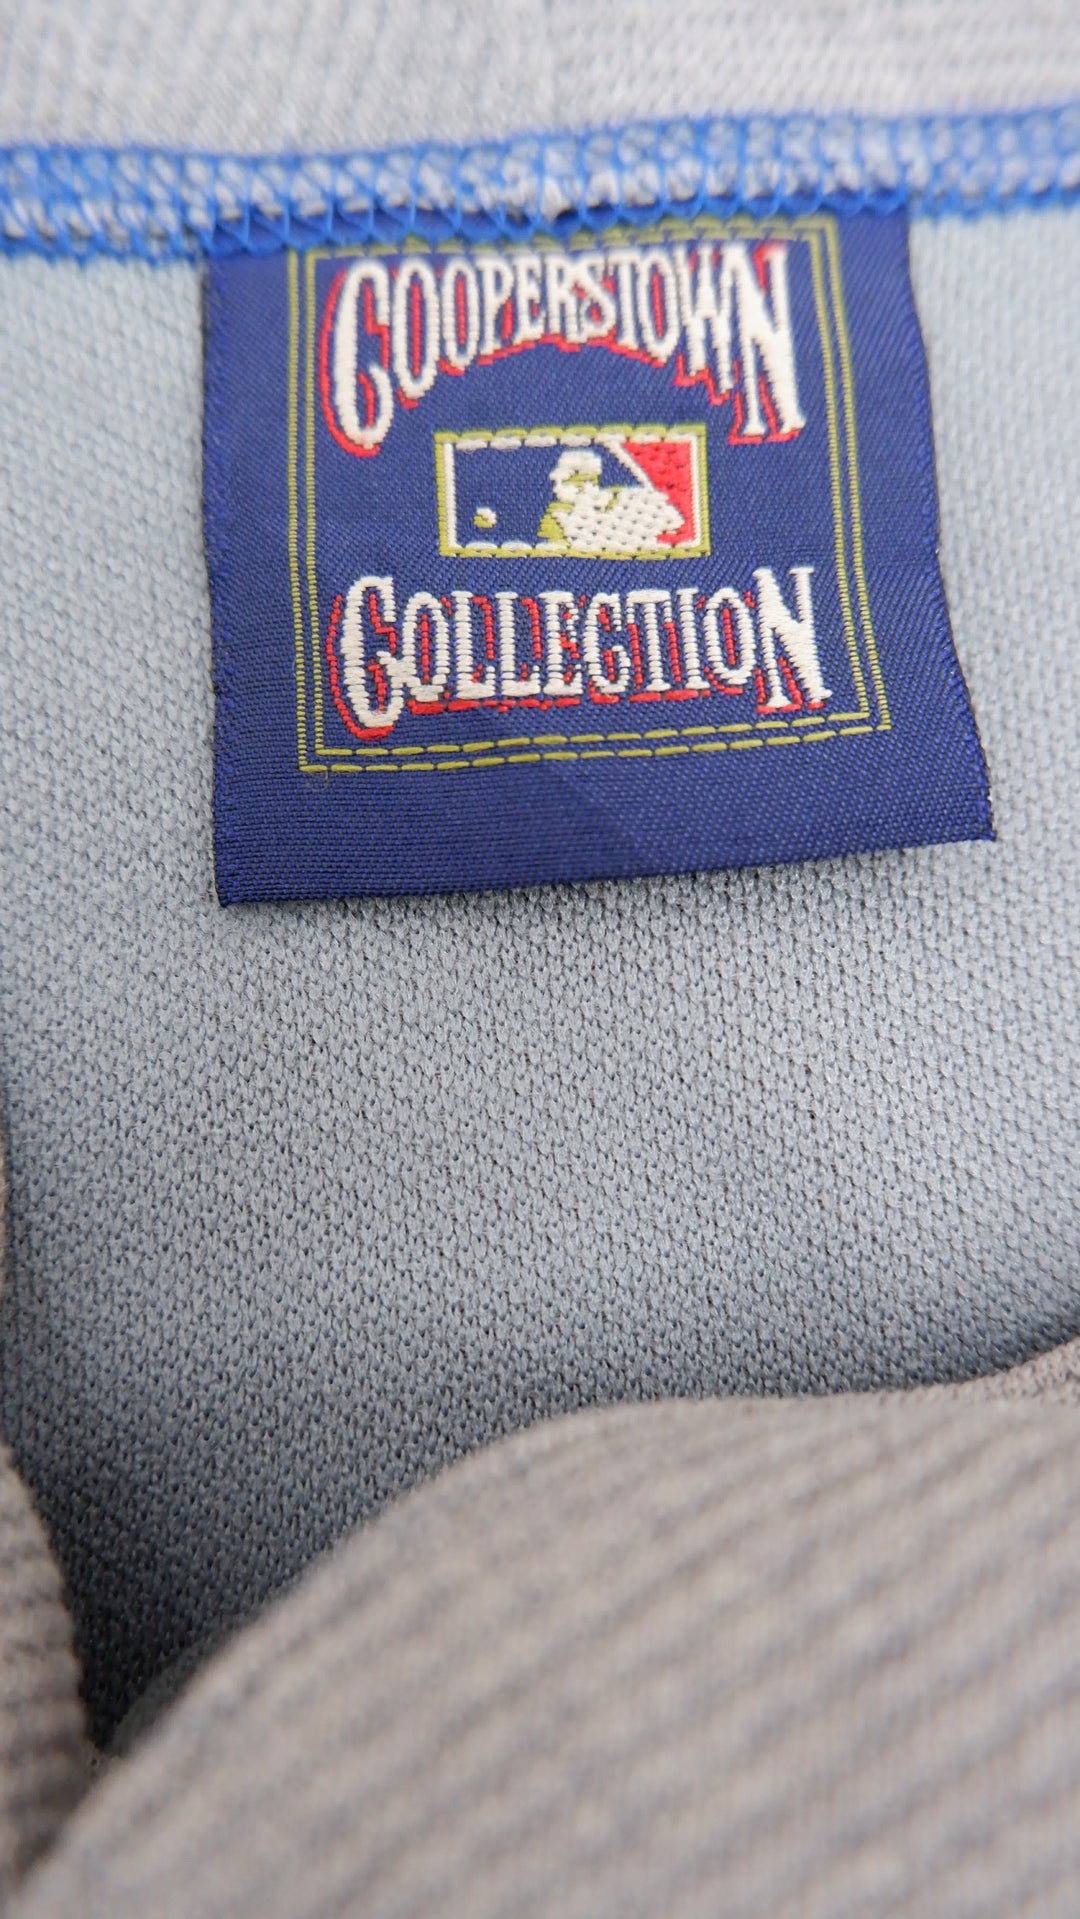 Vintage Cooperstown Collection Chicago Button Majestic Jersey